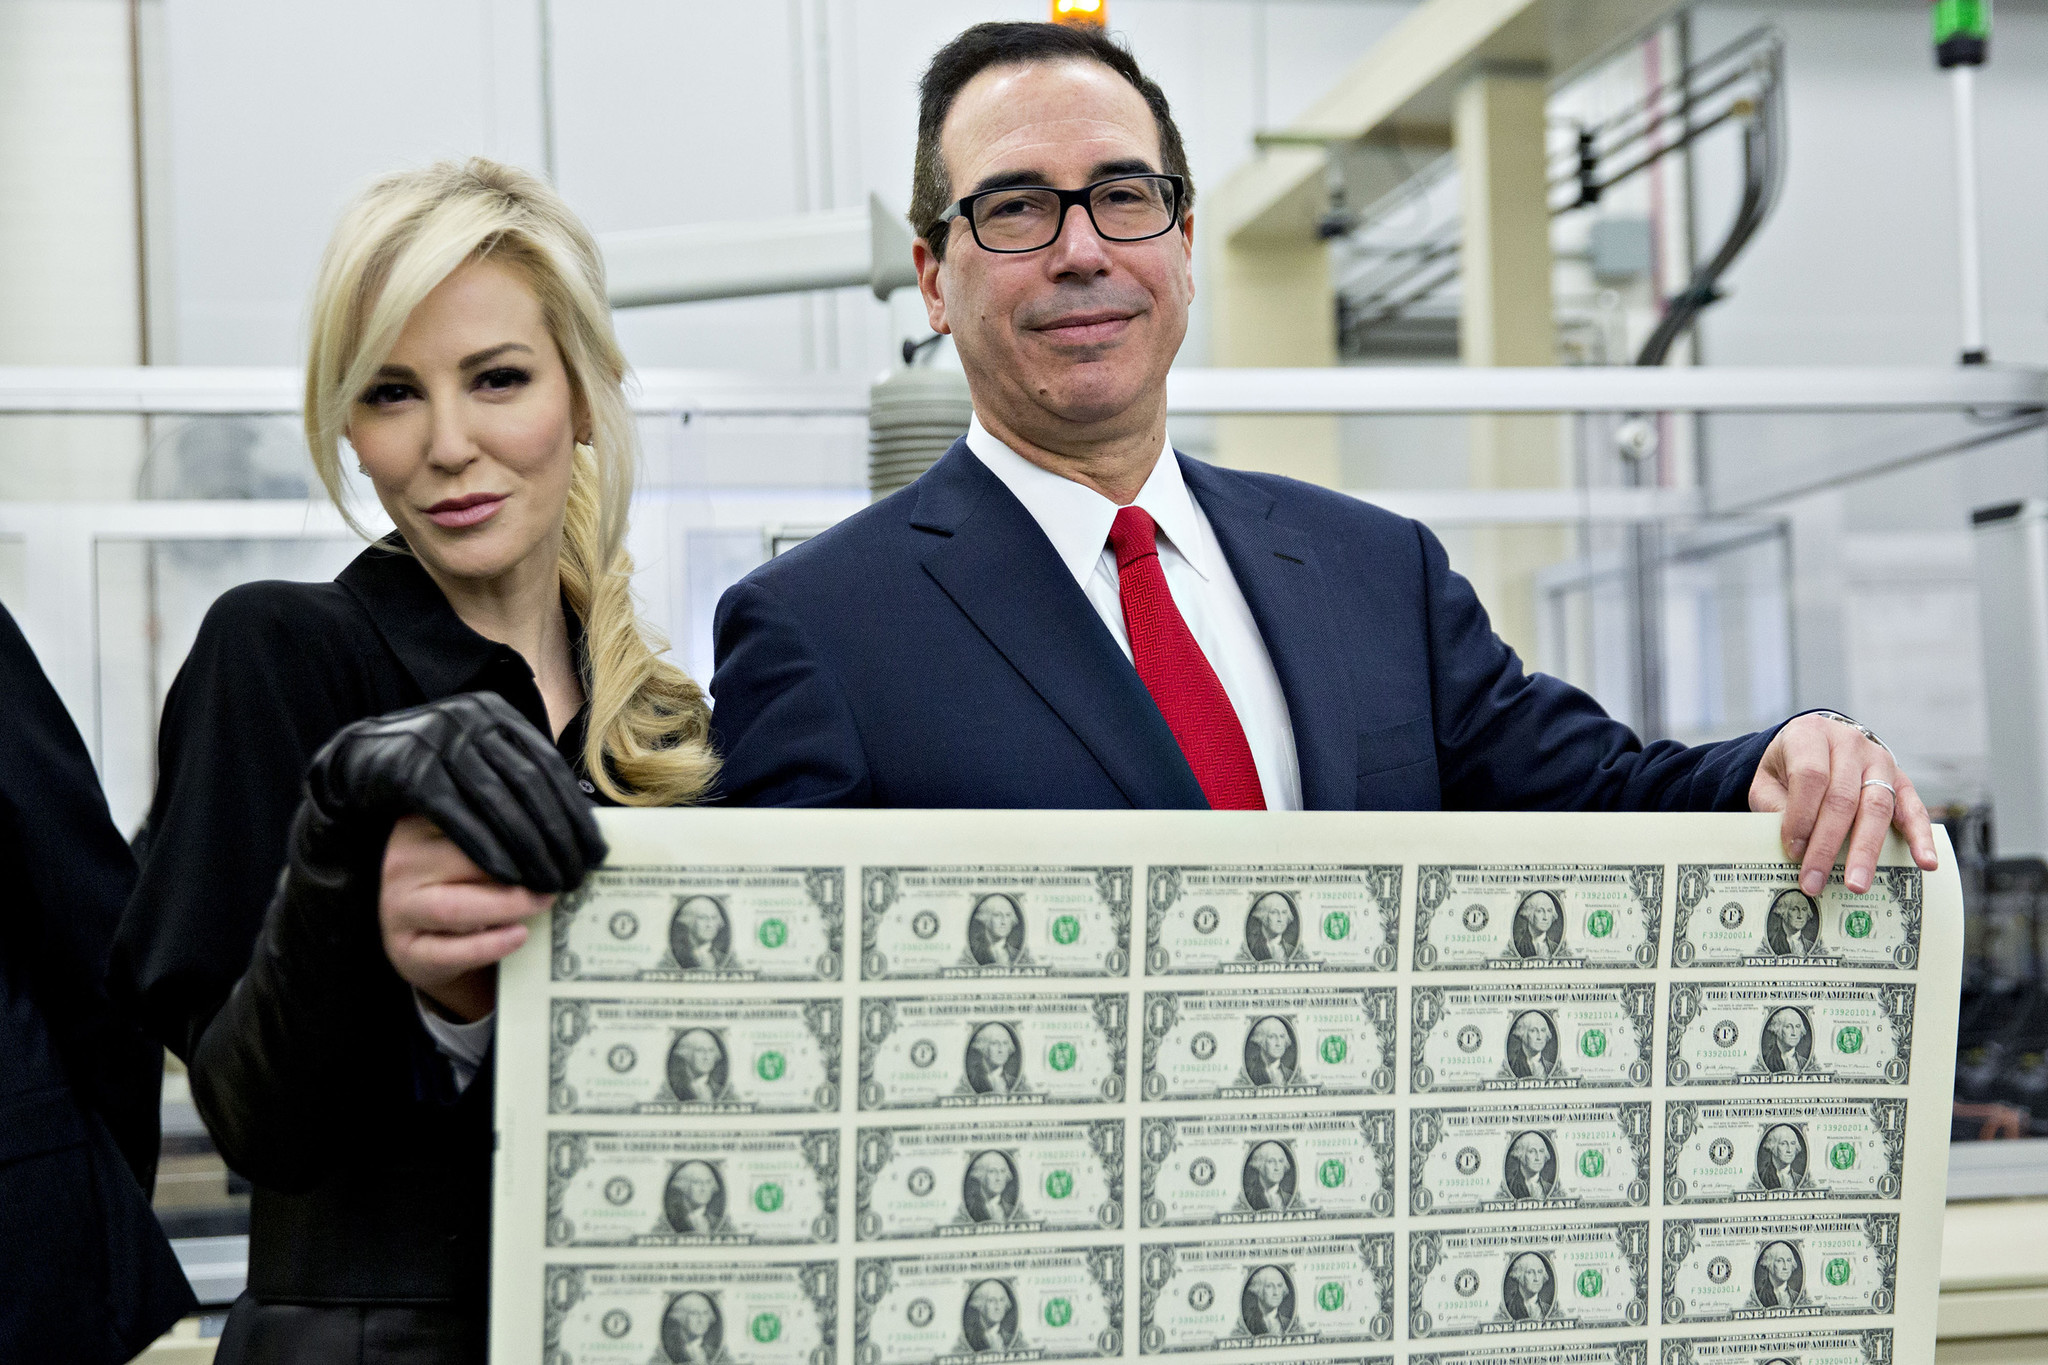 Internet Mocks Treasury Secretary And His Wife For Posing With A Sheet